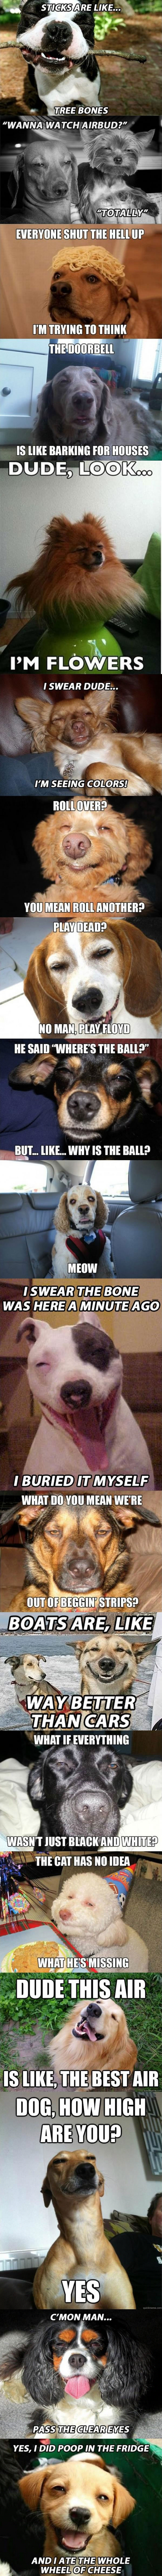 18 dogs that want it to be legalized, stoned canine memes